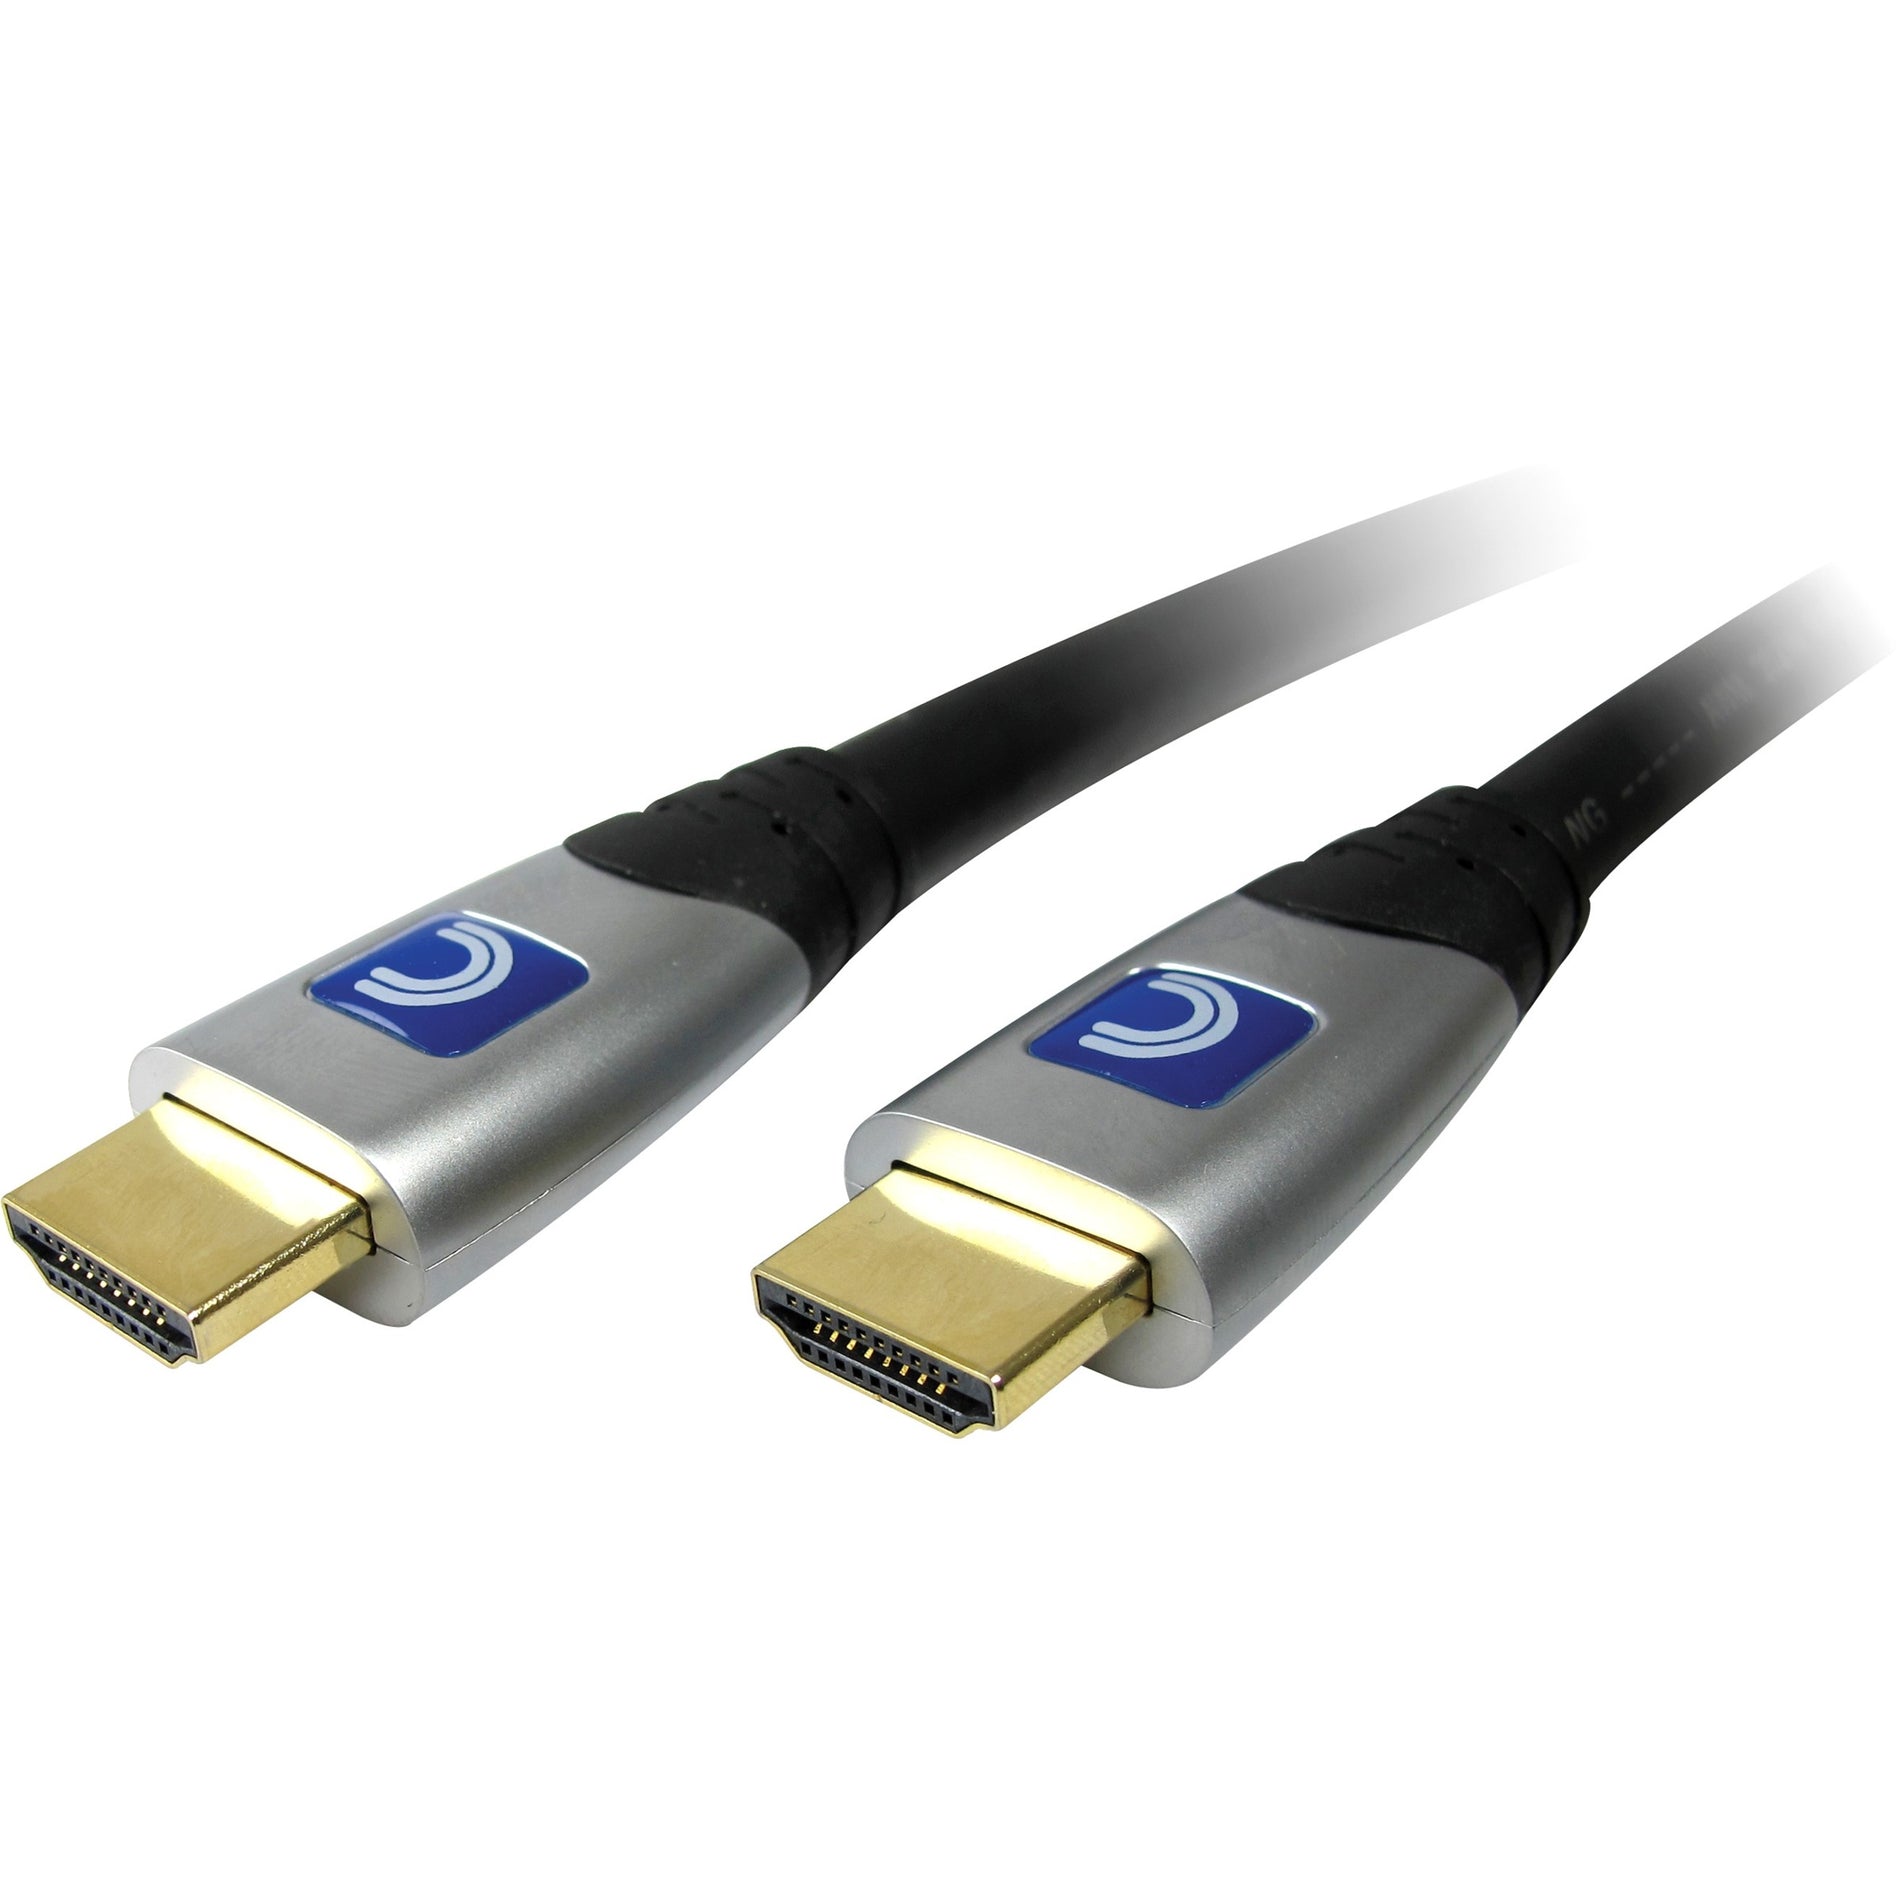 Comprehensive X3V-HD15E Pro AV/IT Advanced HDMI Cable 15ft, High Speed w/Ethernet